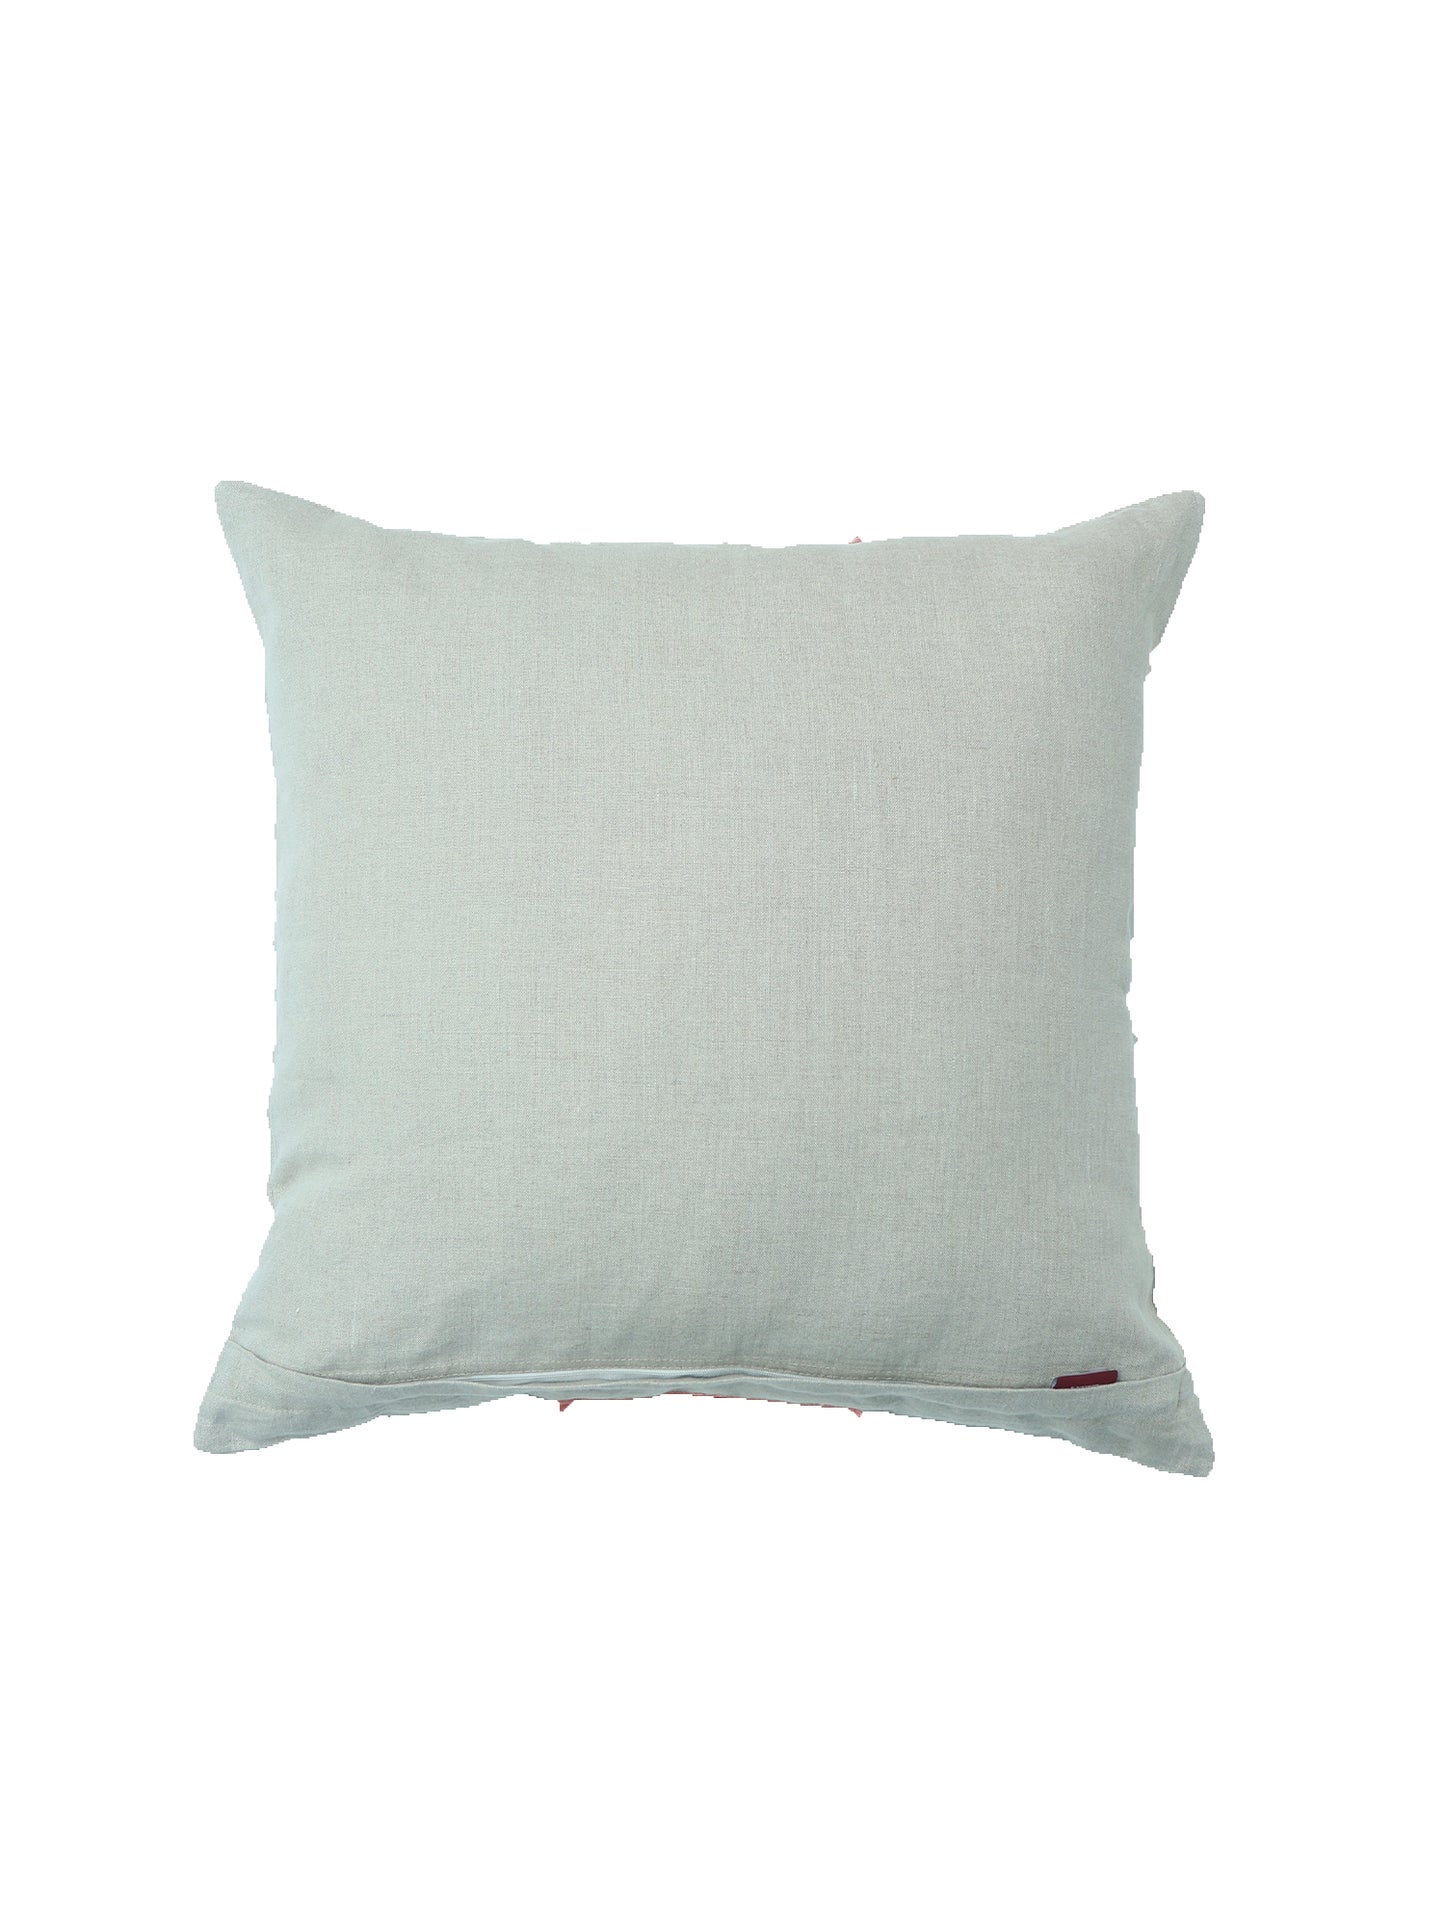 Cushion Cover Poly Canvas Patchwork with Embroidery White - 18" x 18"